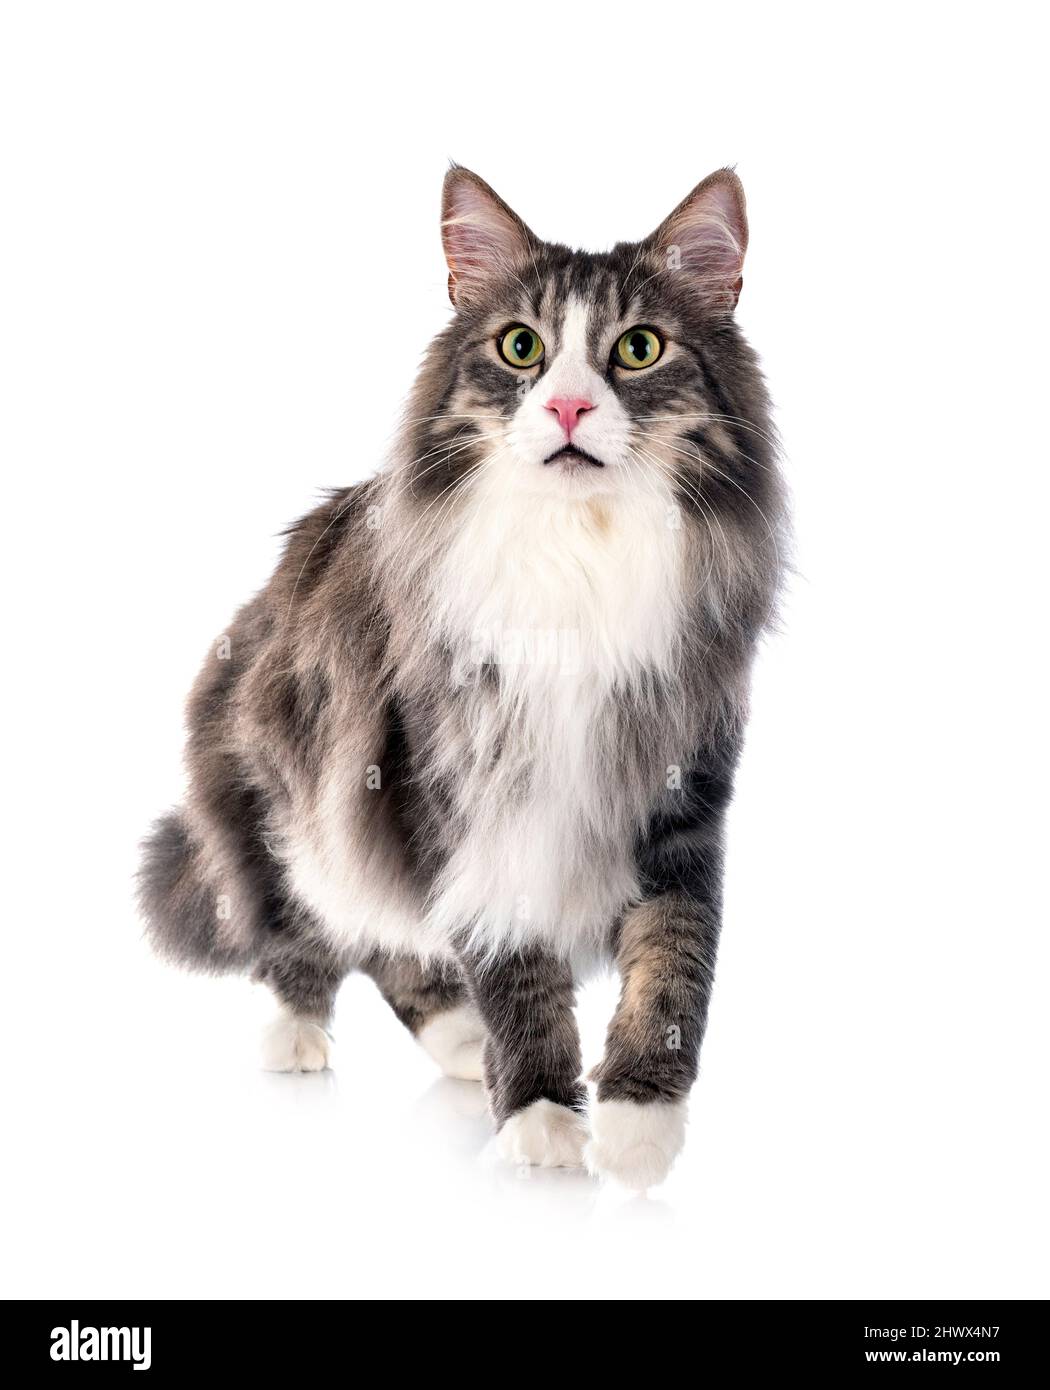 Norwegian Forest cat in front of white background Stock Photo - Alamy